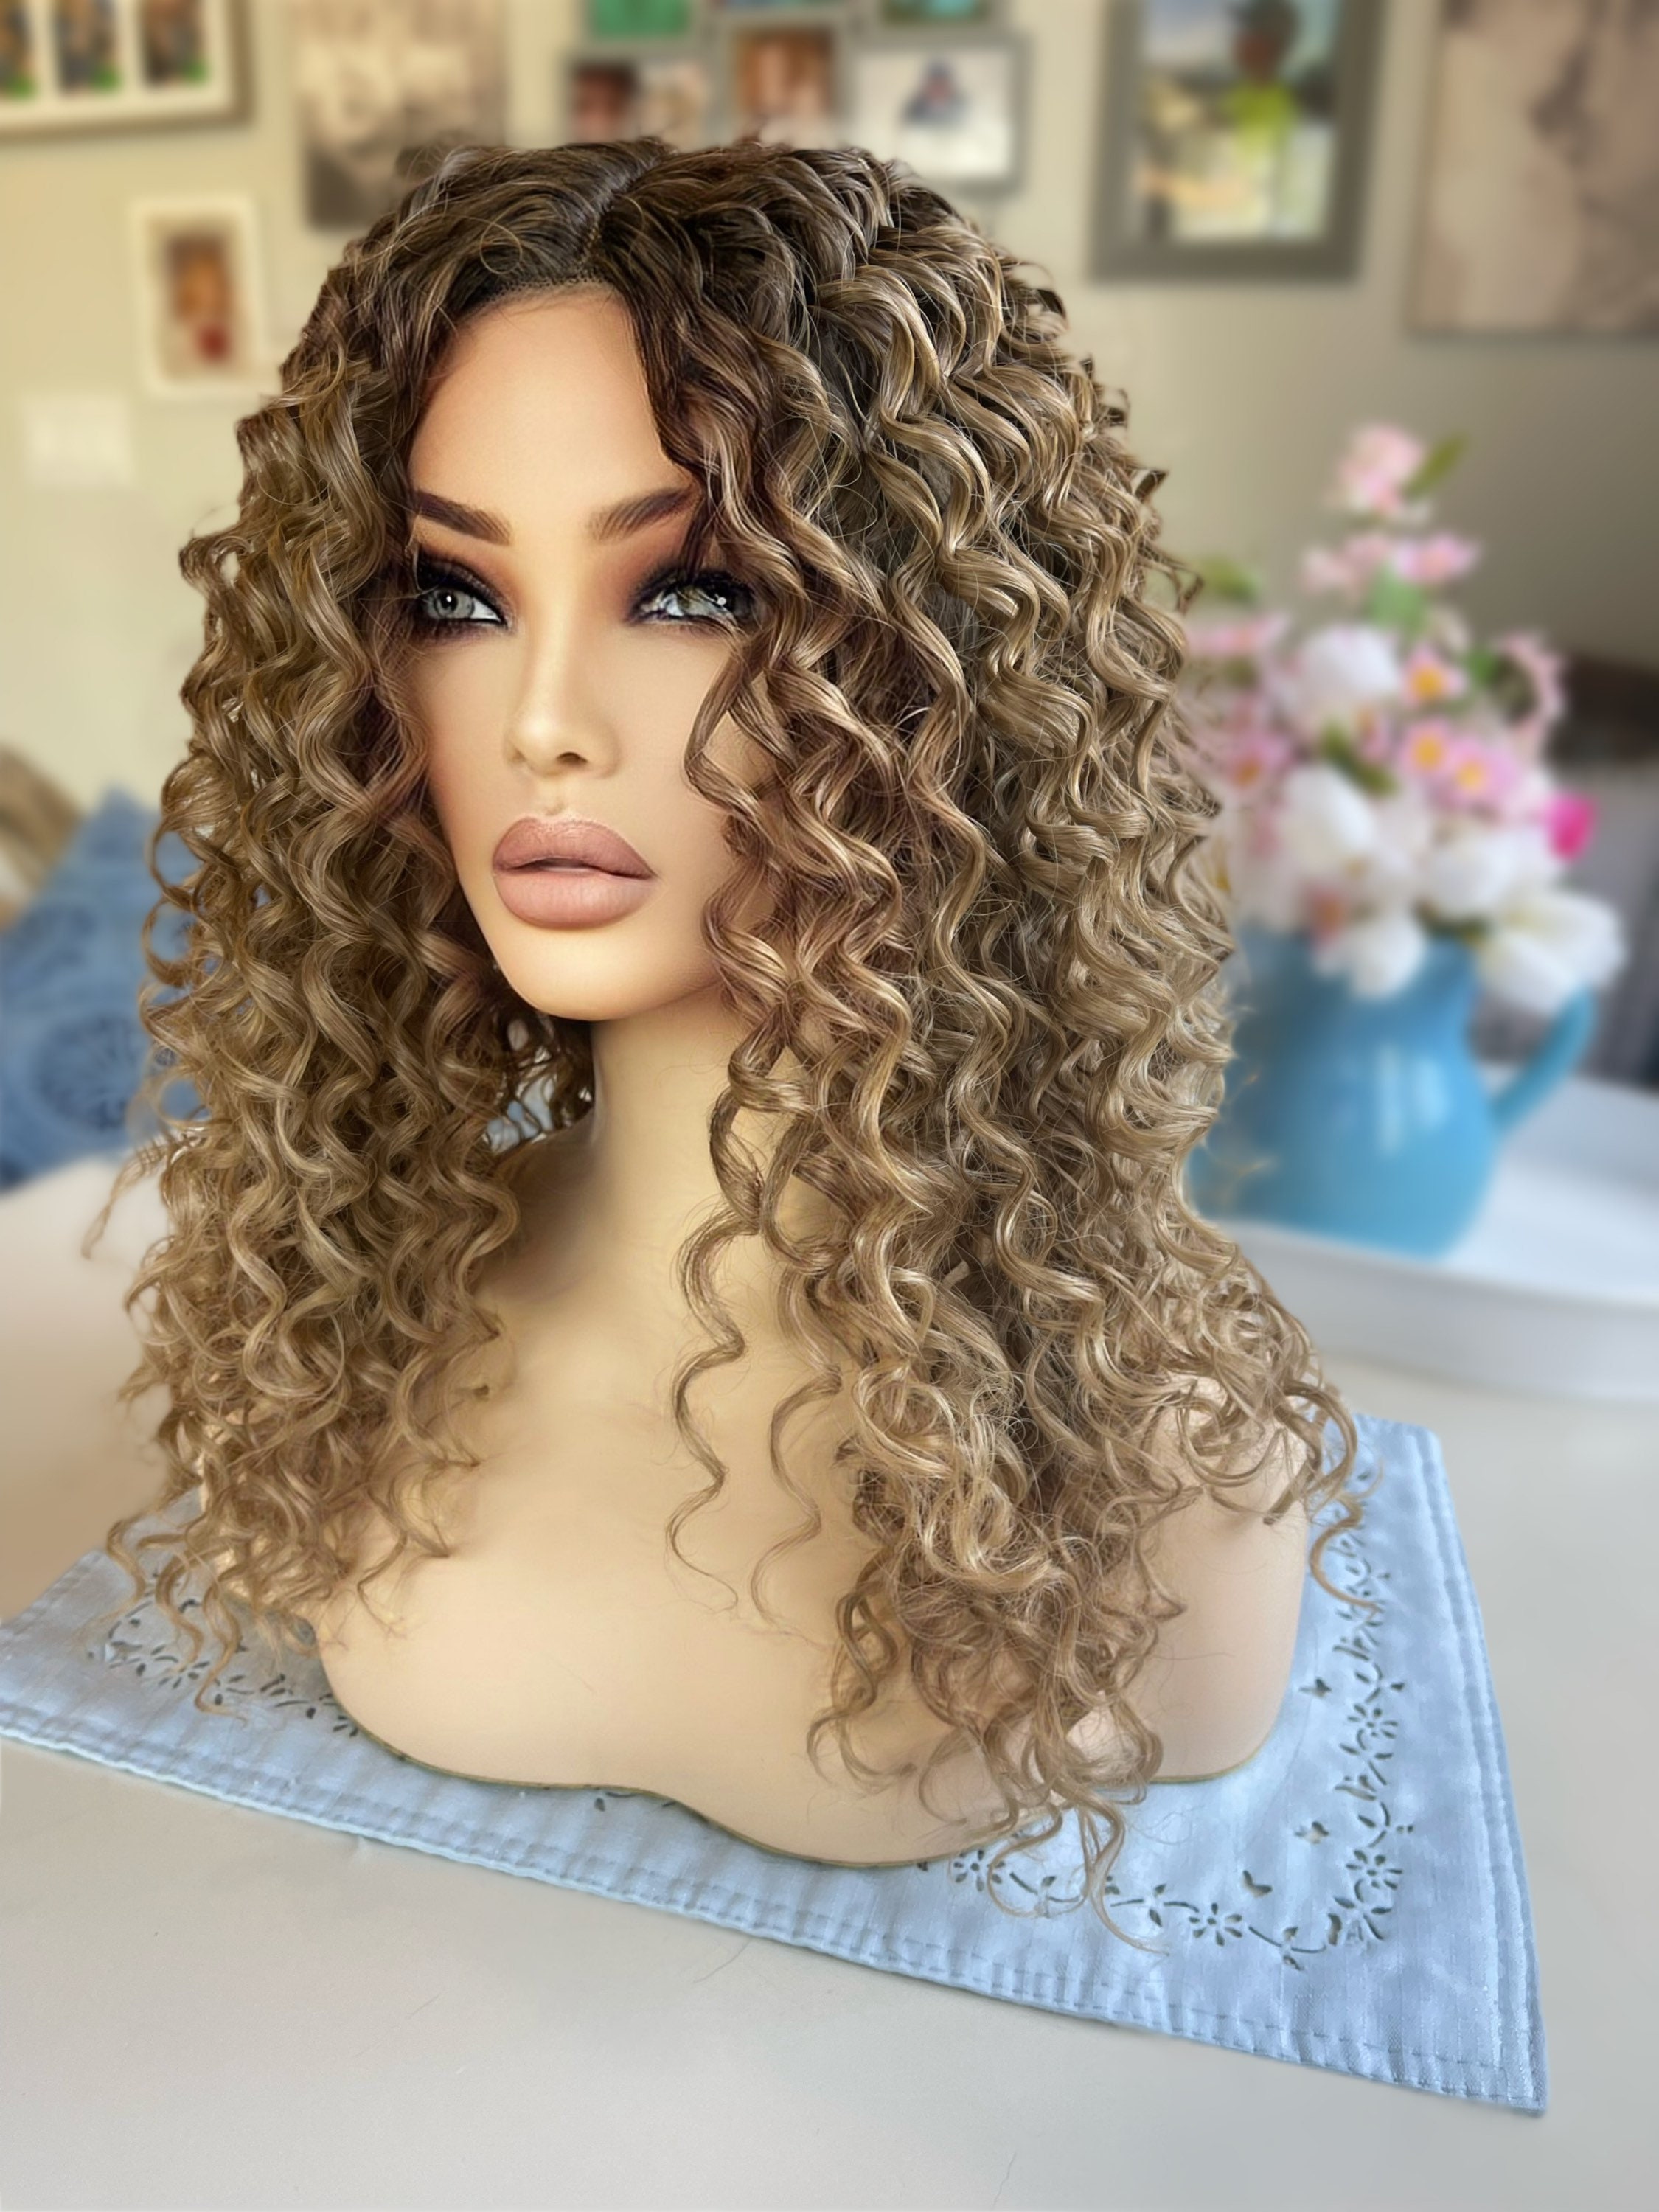 Add An Adjustable Wig Band & Nape Comb to My Wig Sale Ivory